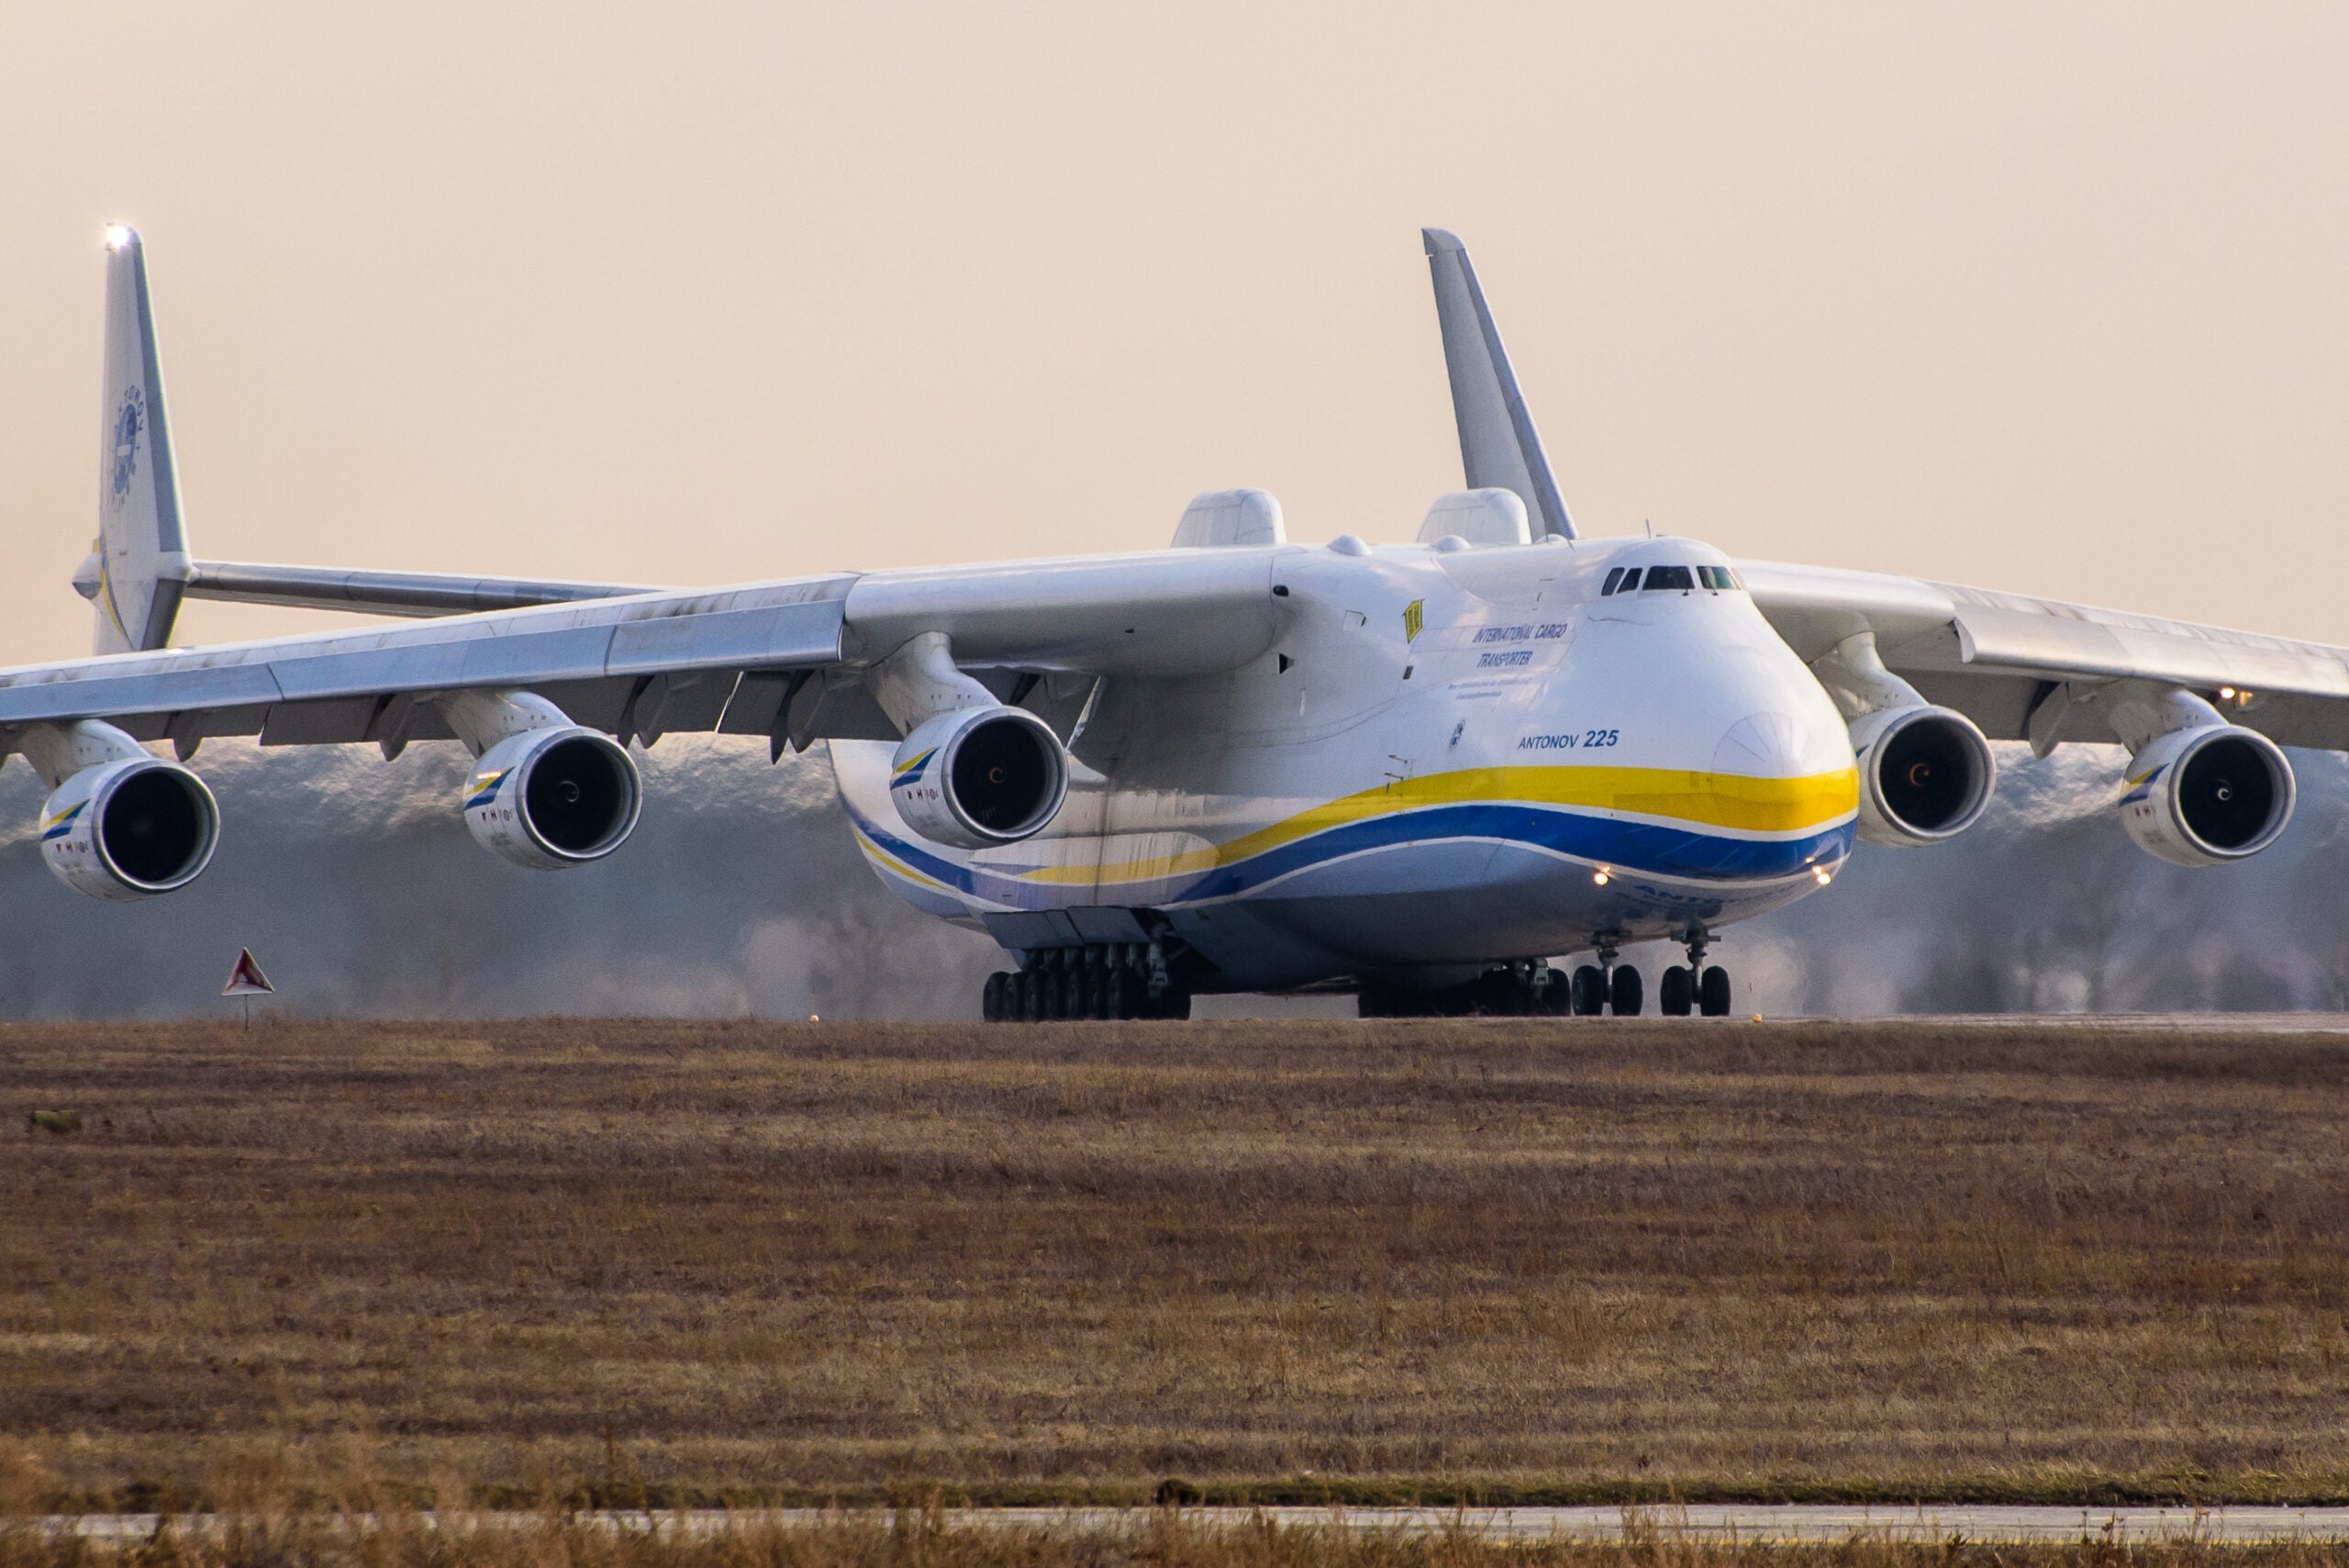 New Video Claims to Confirm An-225 Destruction